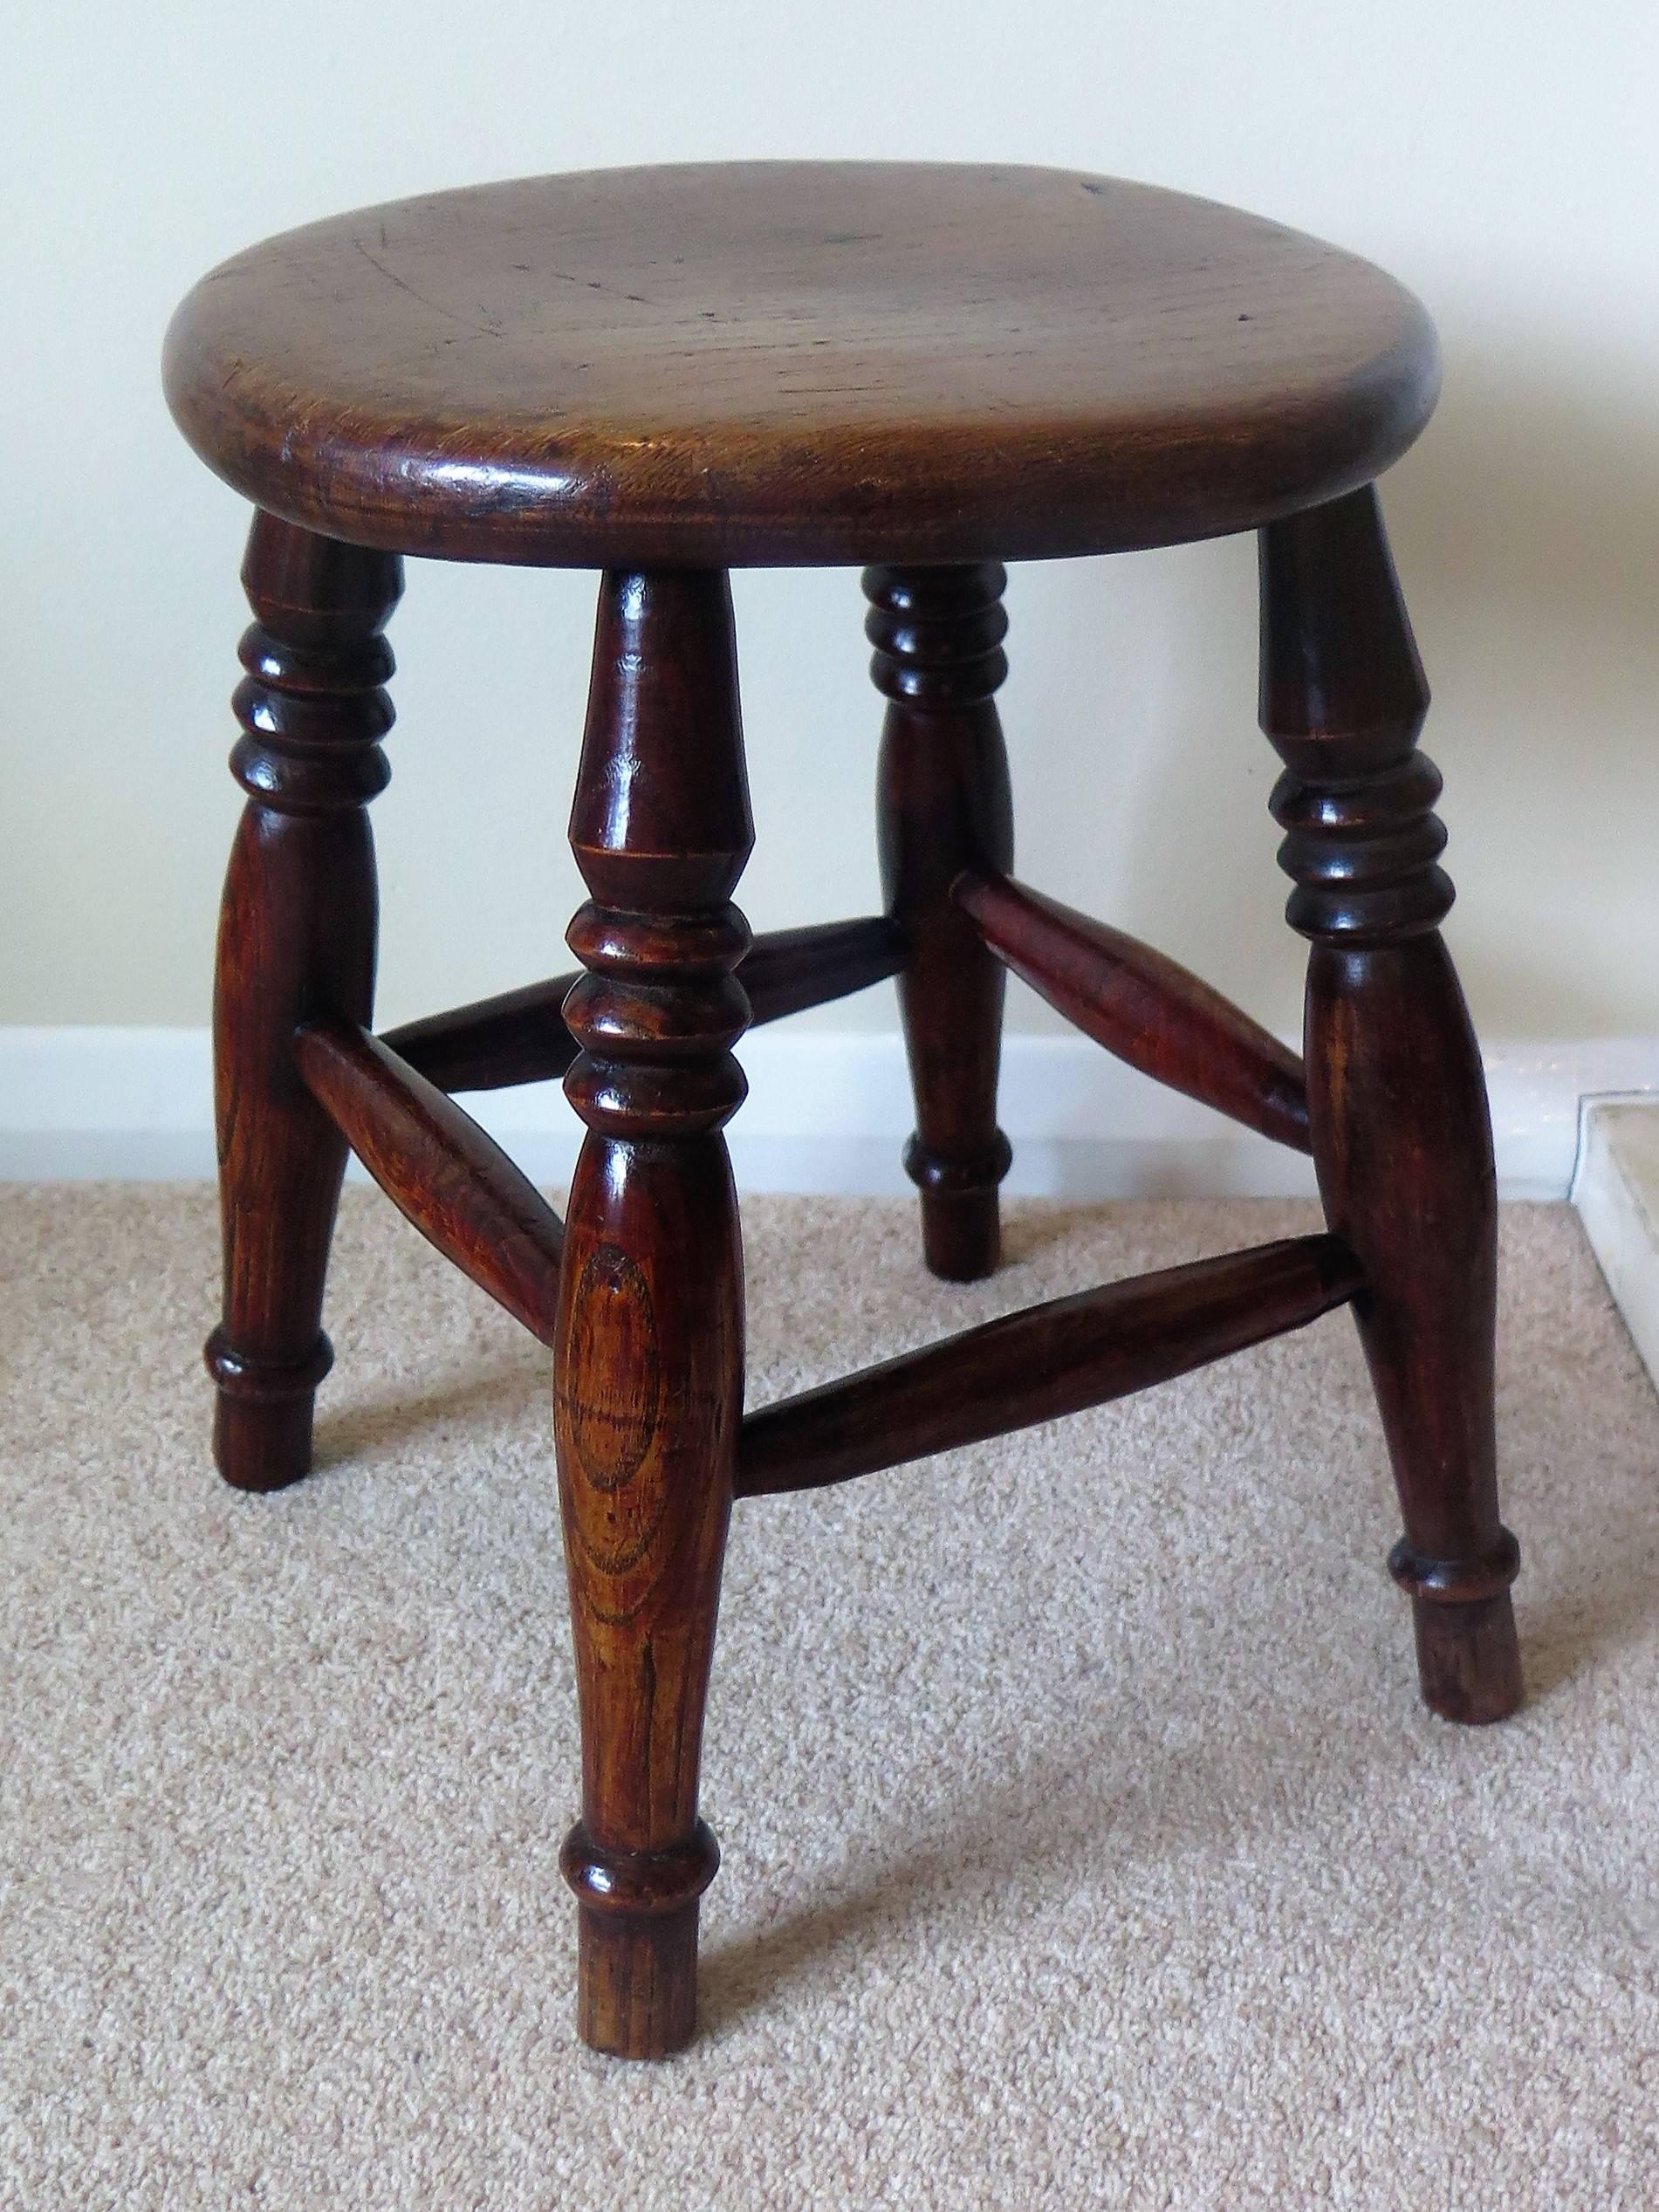 This is a lovely country stool made of Elm in Victorian England during the 19th century, circa 1850.

The elm stool has thick solid circular turned seat or top which sits on four ring turned legs with four shaped turned stretchers between the legs